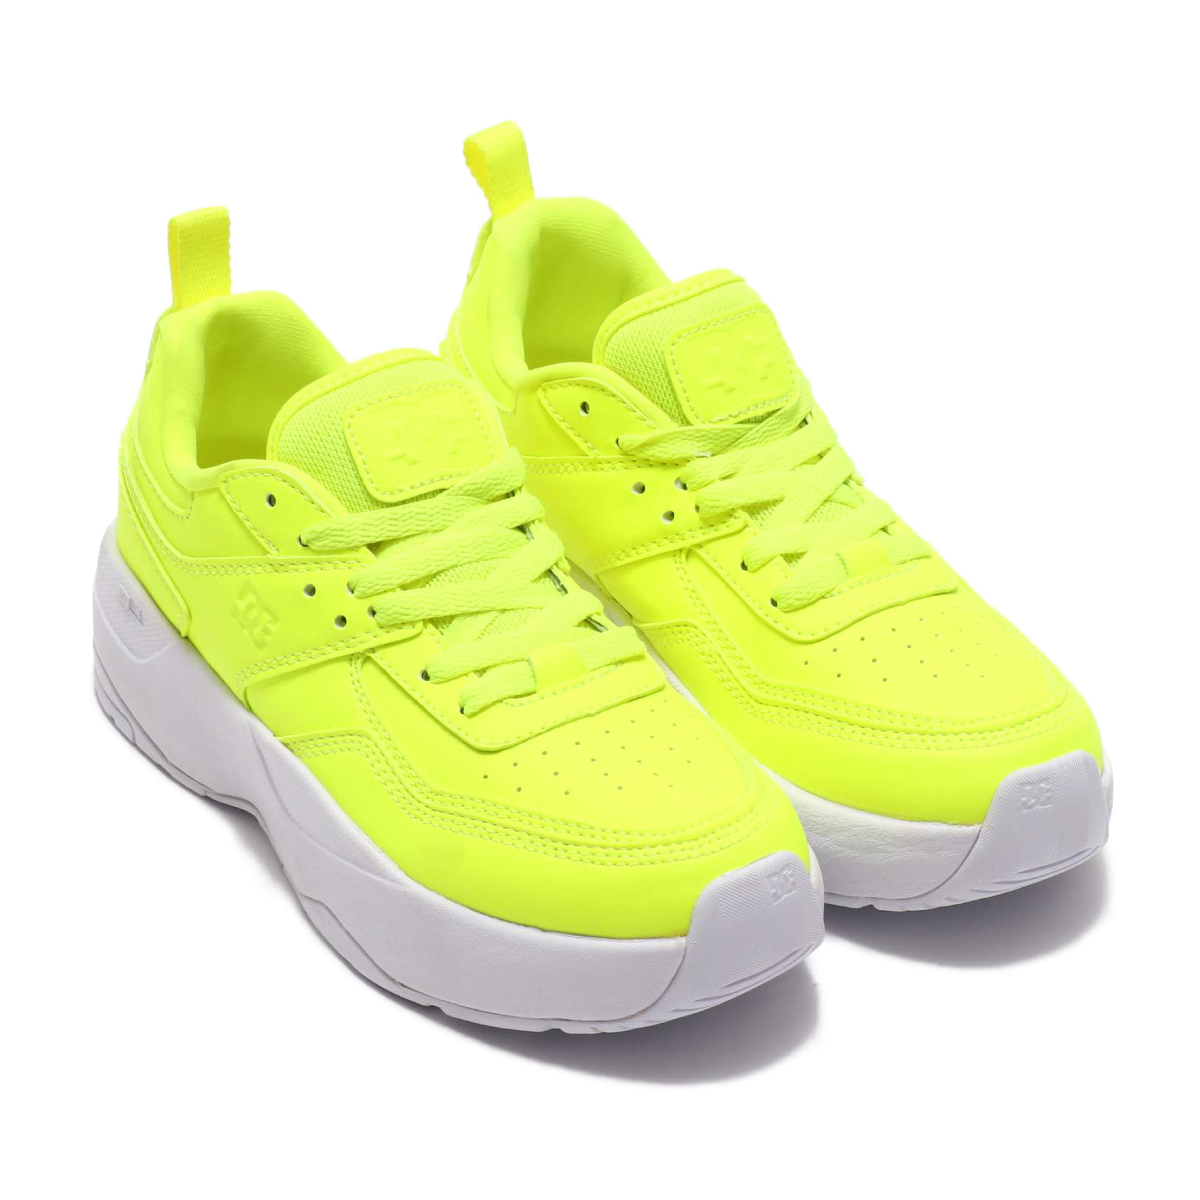 neon yellow shoes for women